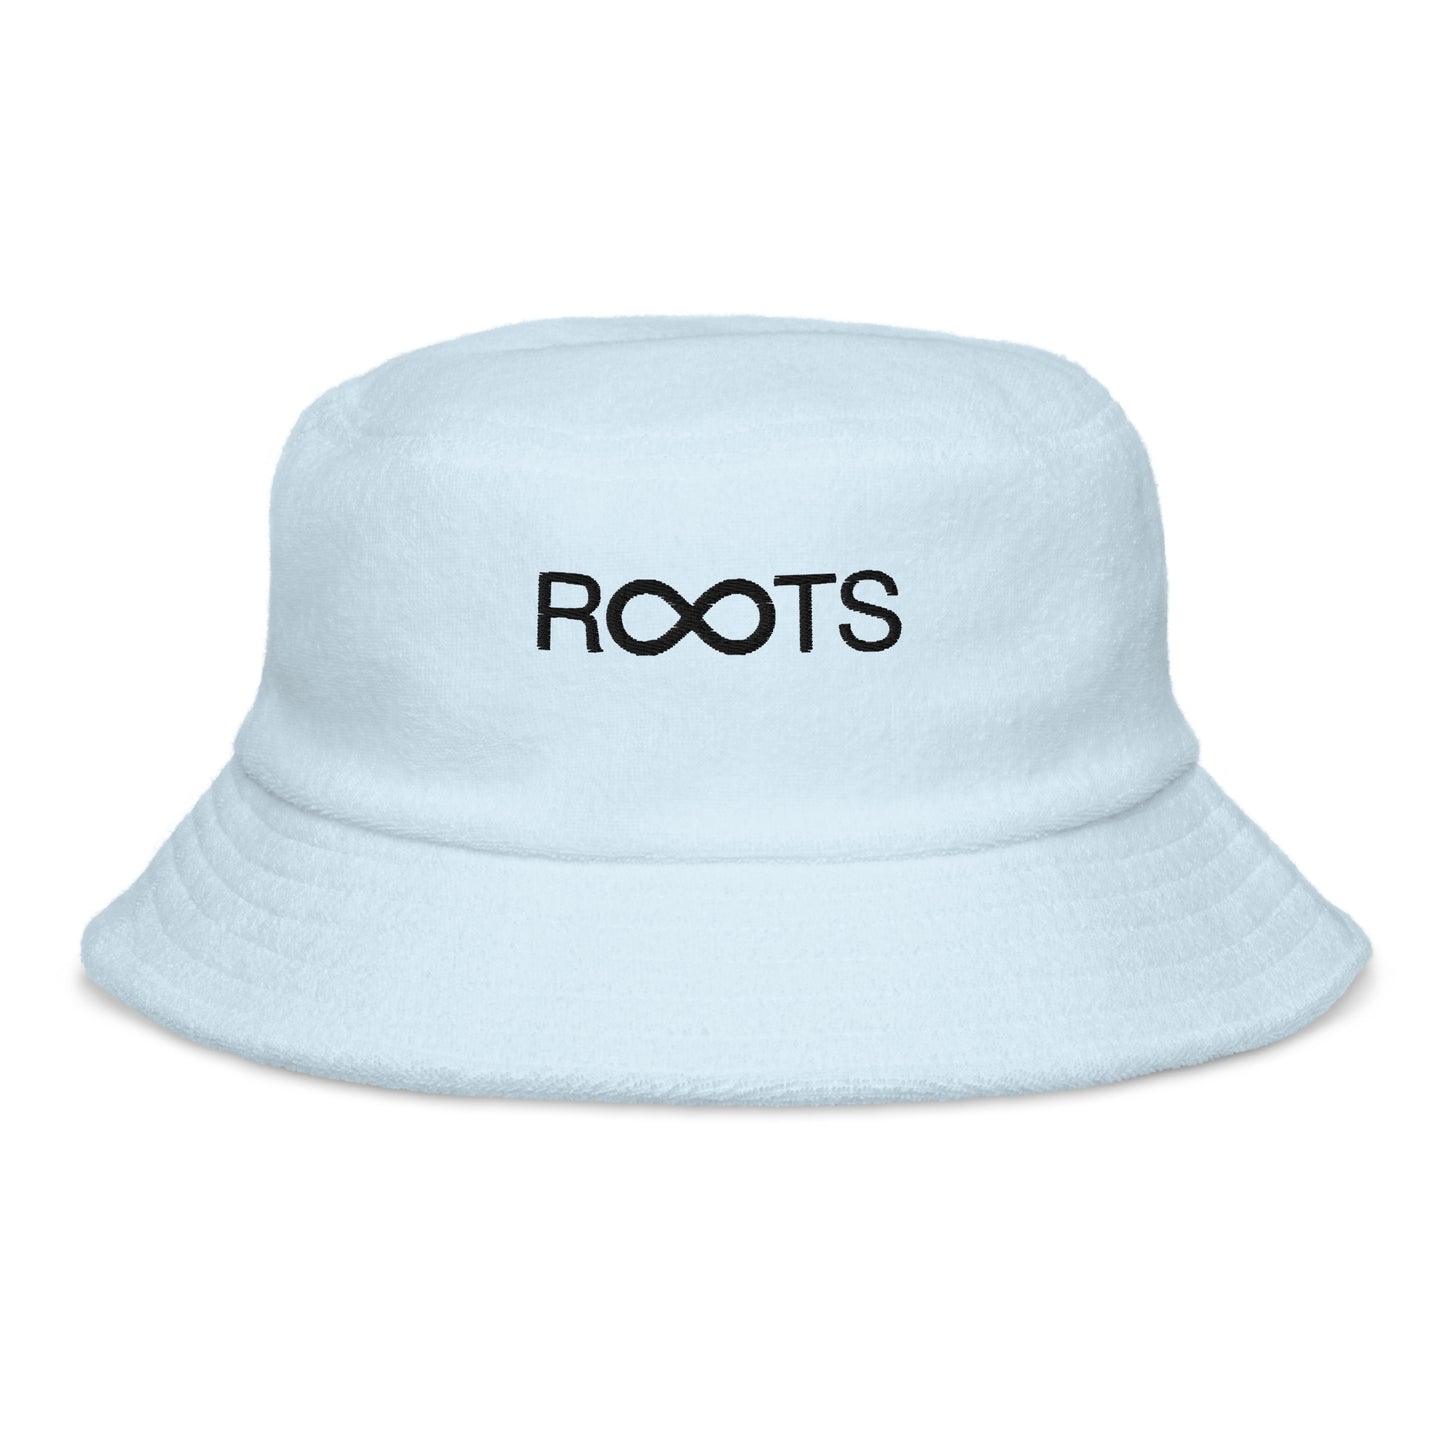 Roots Are Forever terry cloth bucket hat